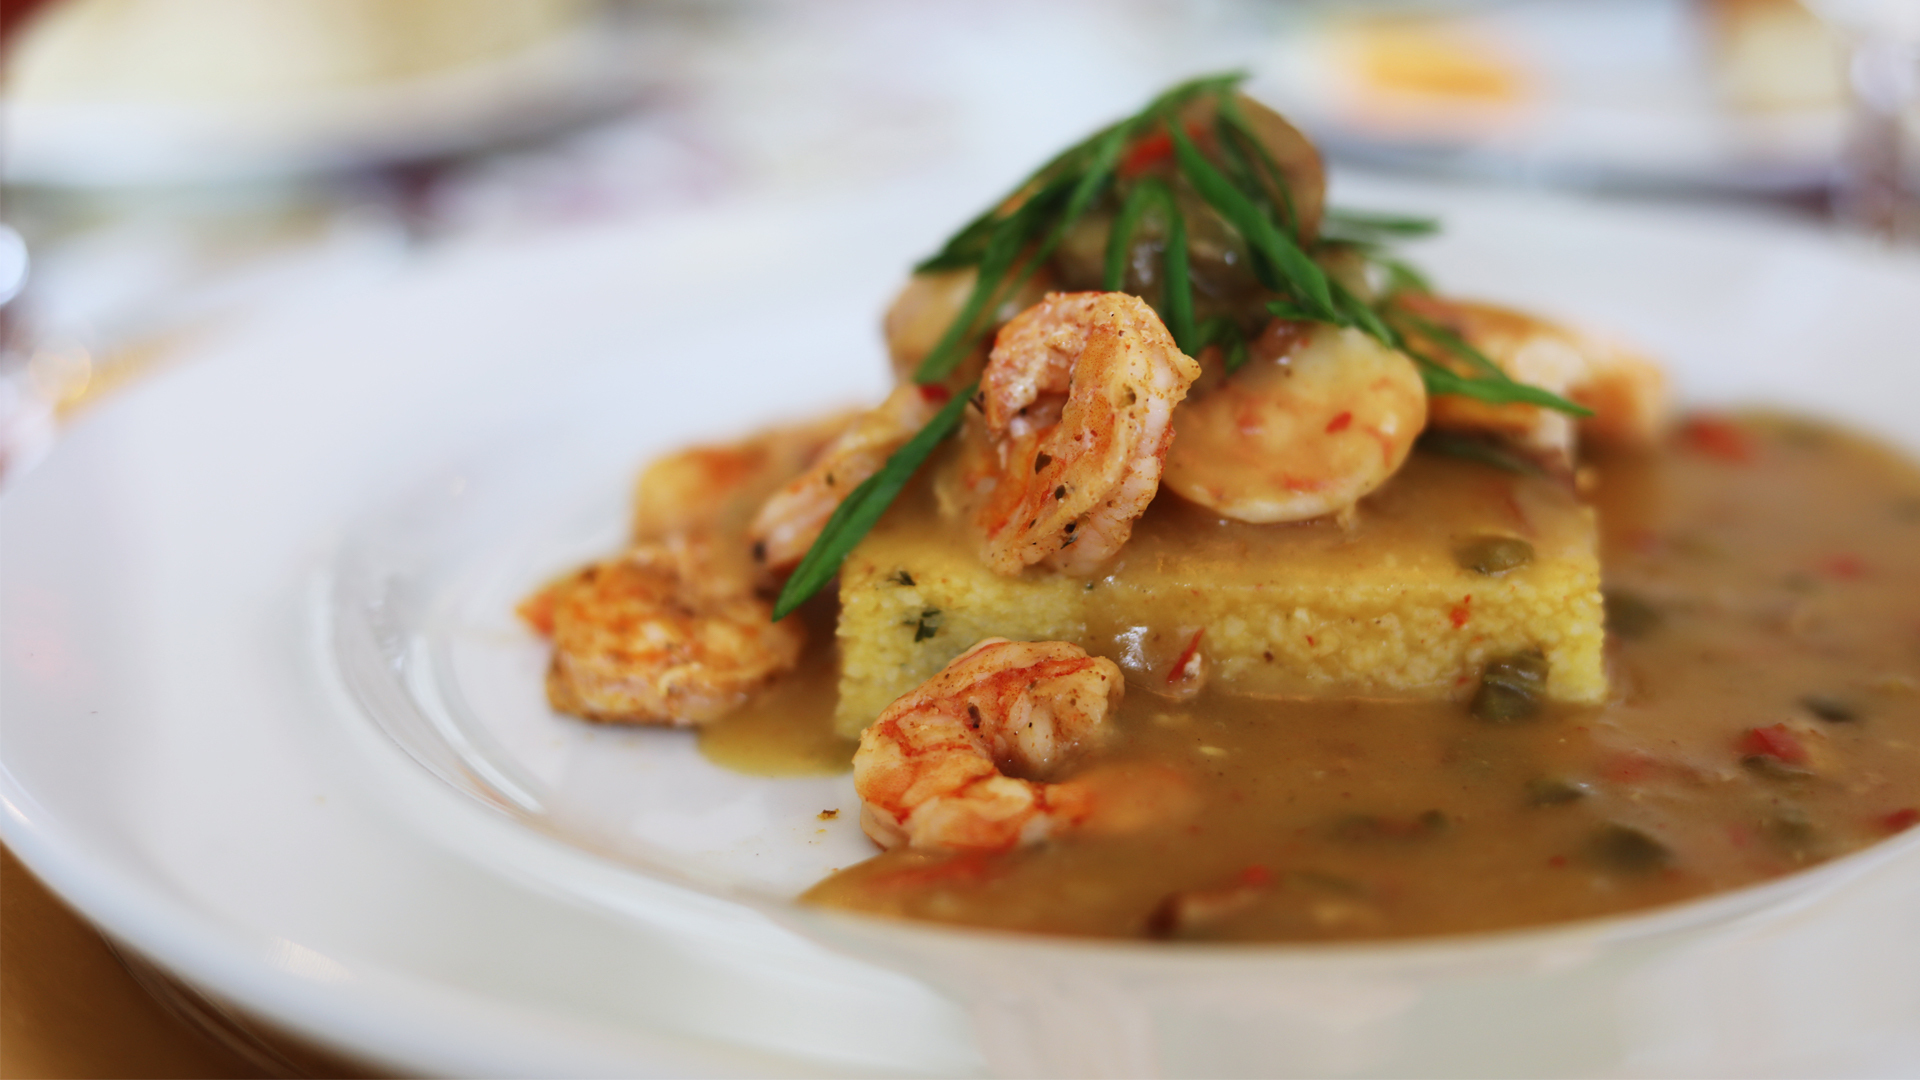 A plate of shrimp served with cornbread from Rave! Events catering.